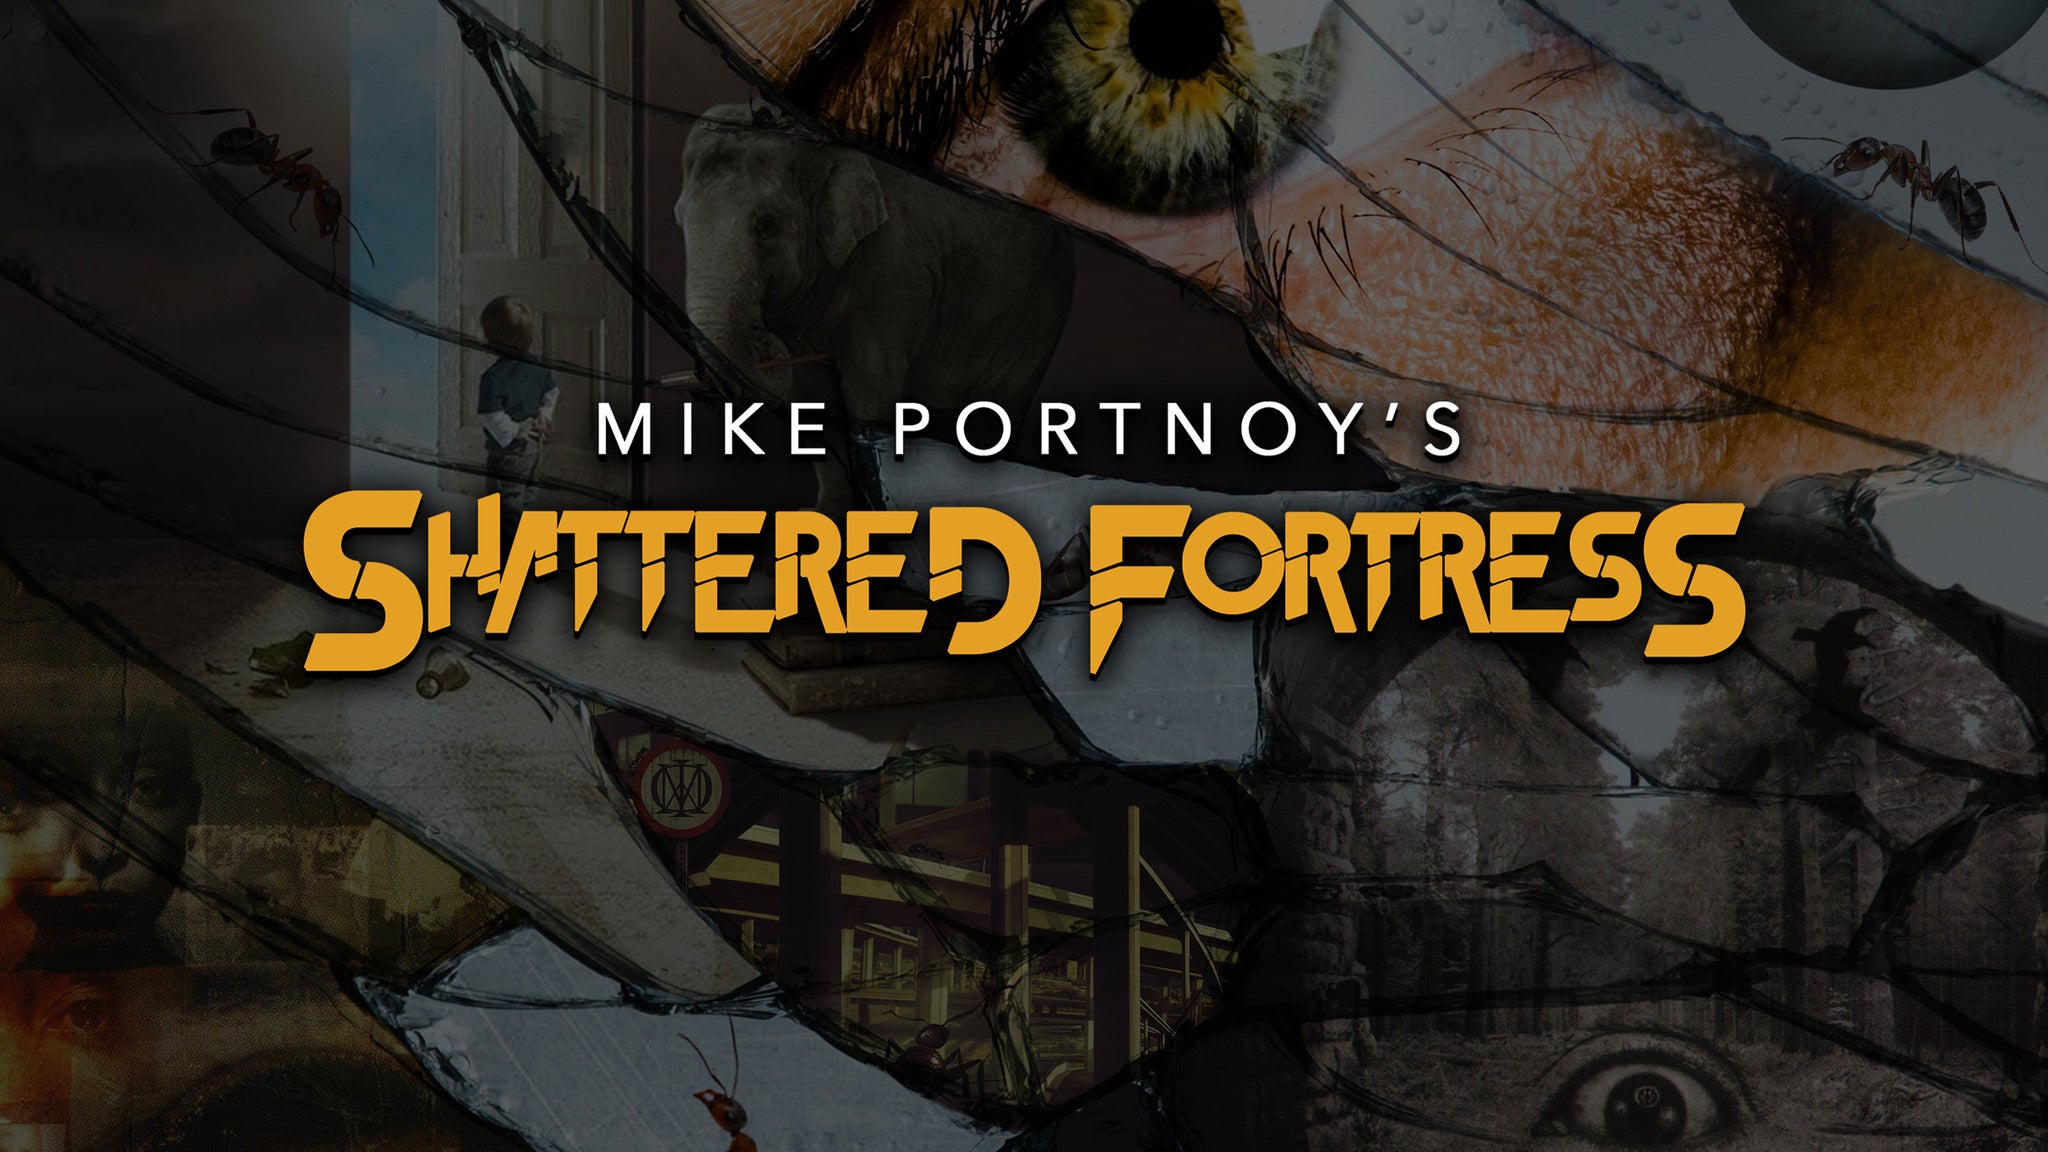 Mike Portnoy's Shattered Fortress playing Dream Theaters 12 Step Suite in New York promo photo for Music Geeks presale offer code